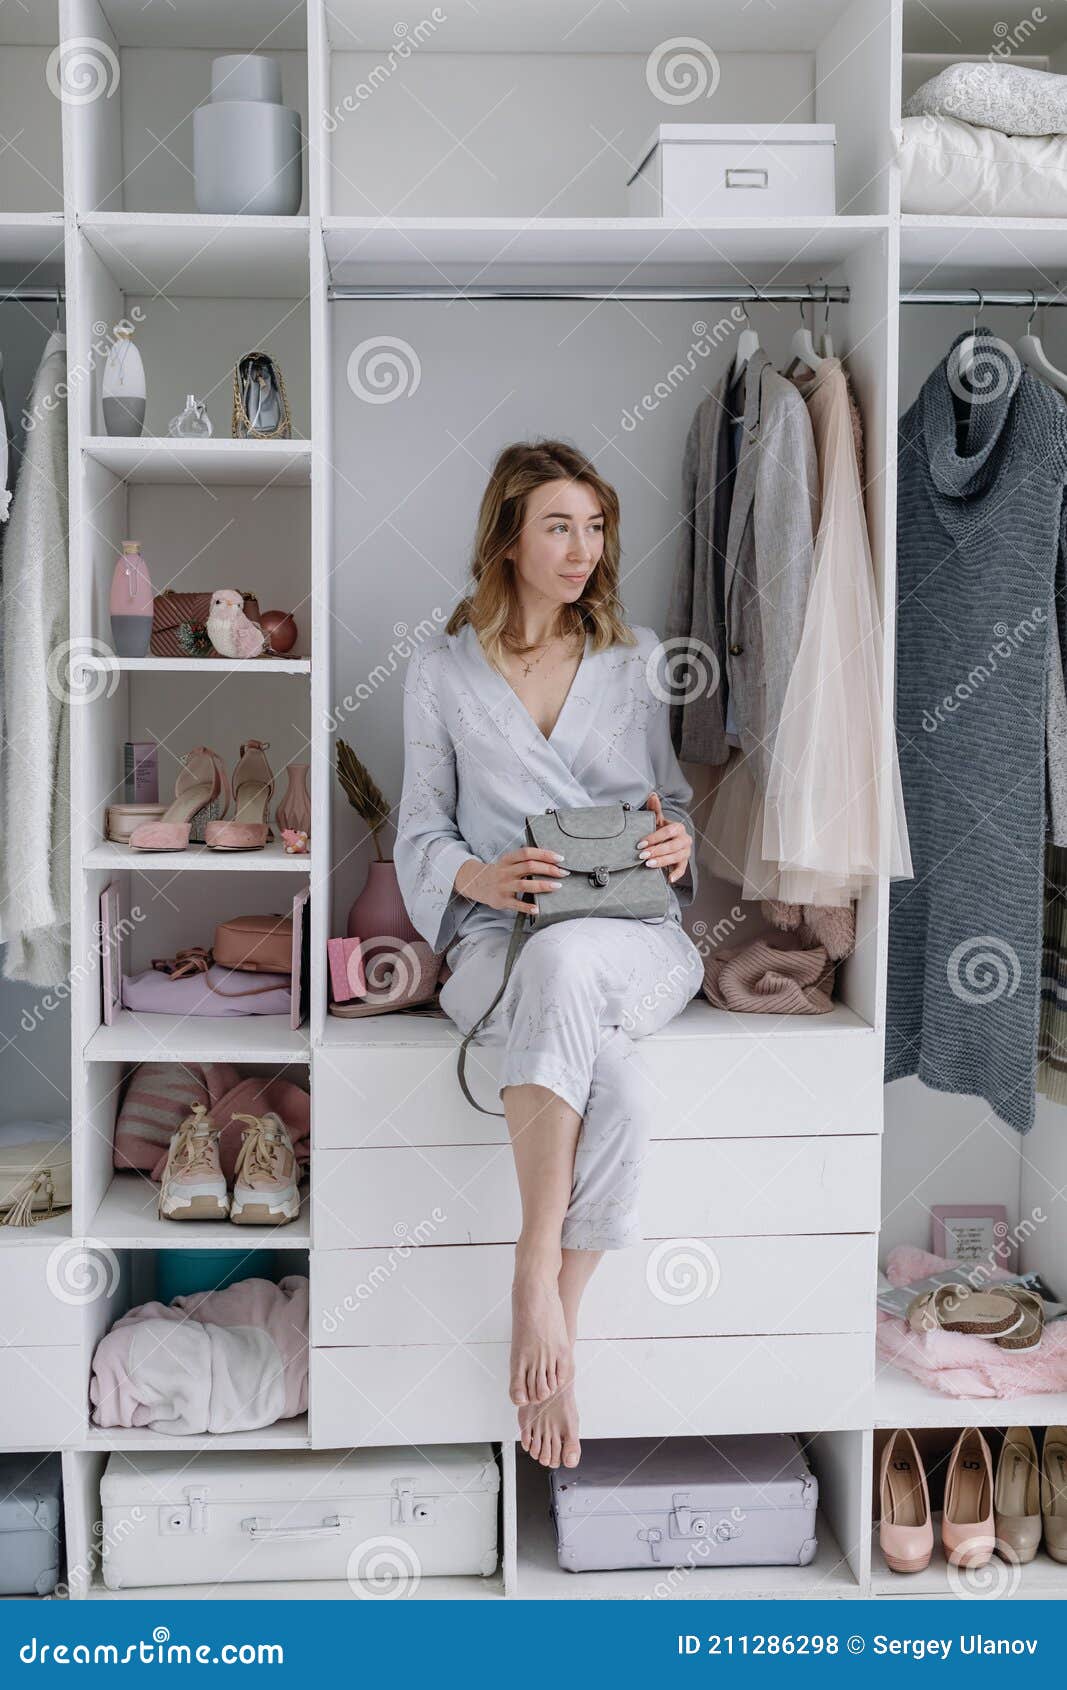 Young Girl Dressing Room